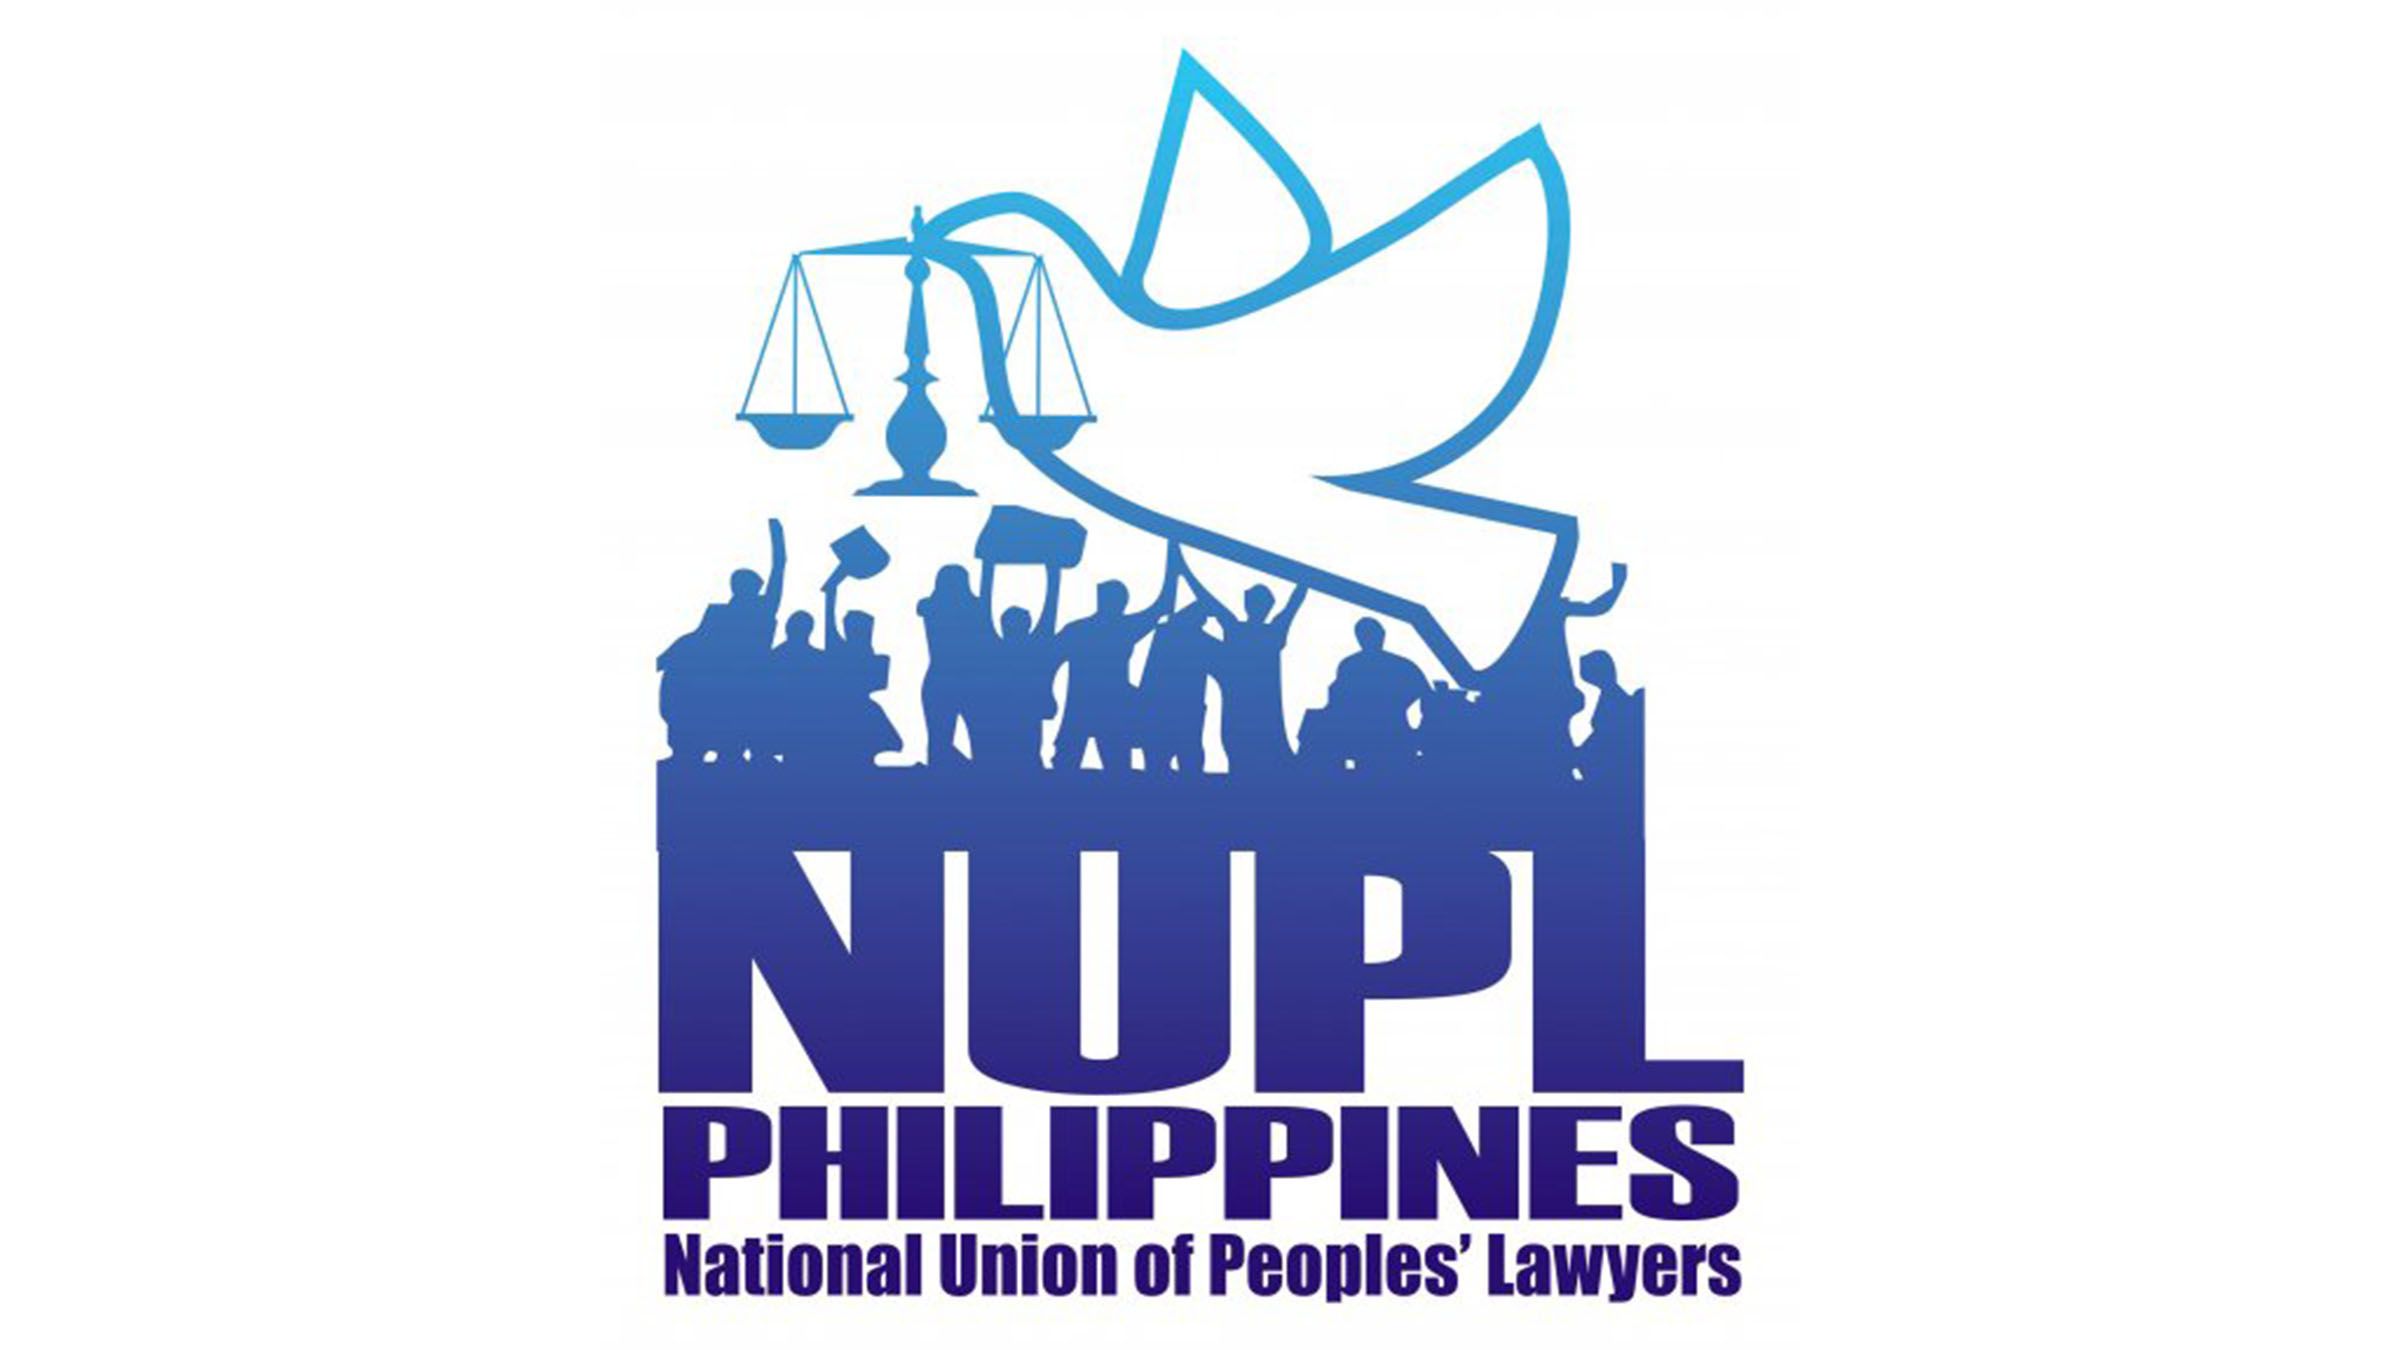 NUPL challenges bar takers to go beyond 'personal, financial gains'